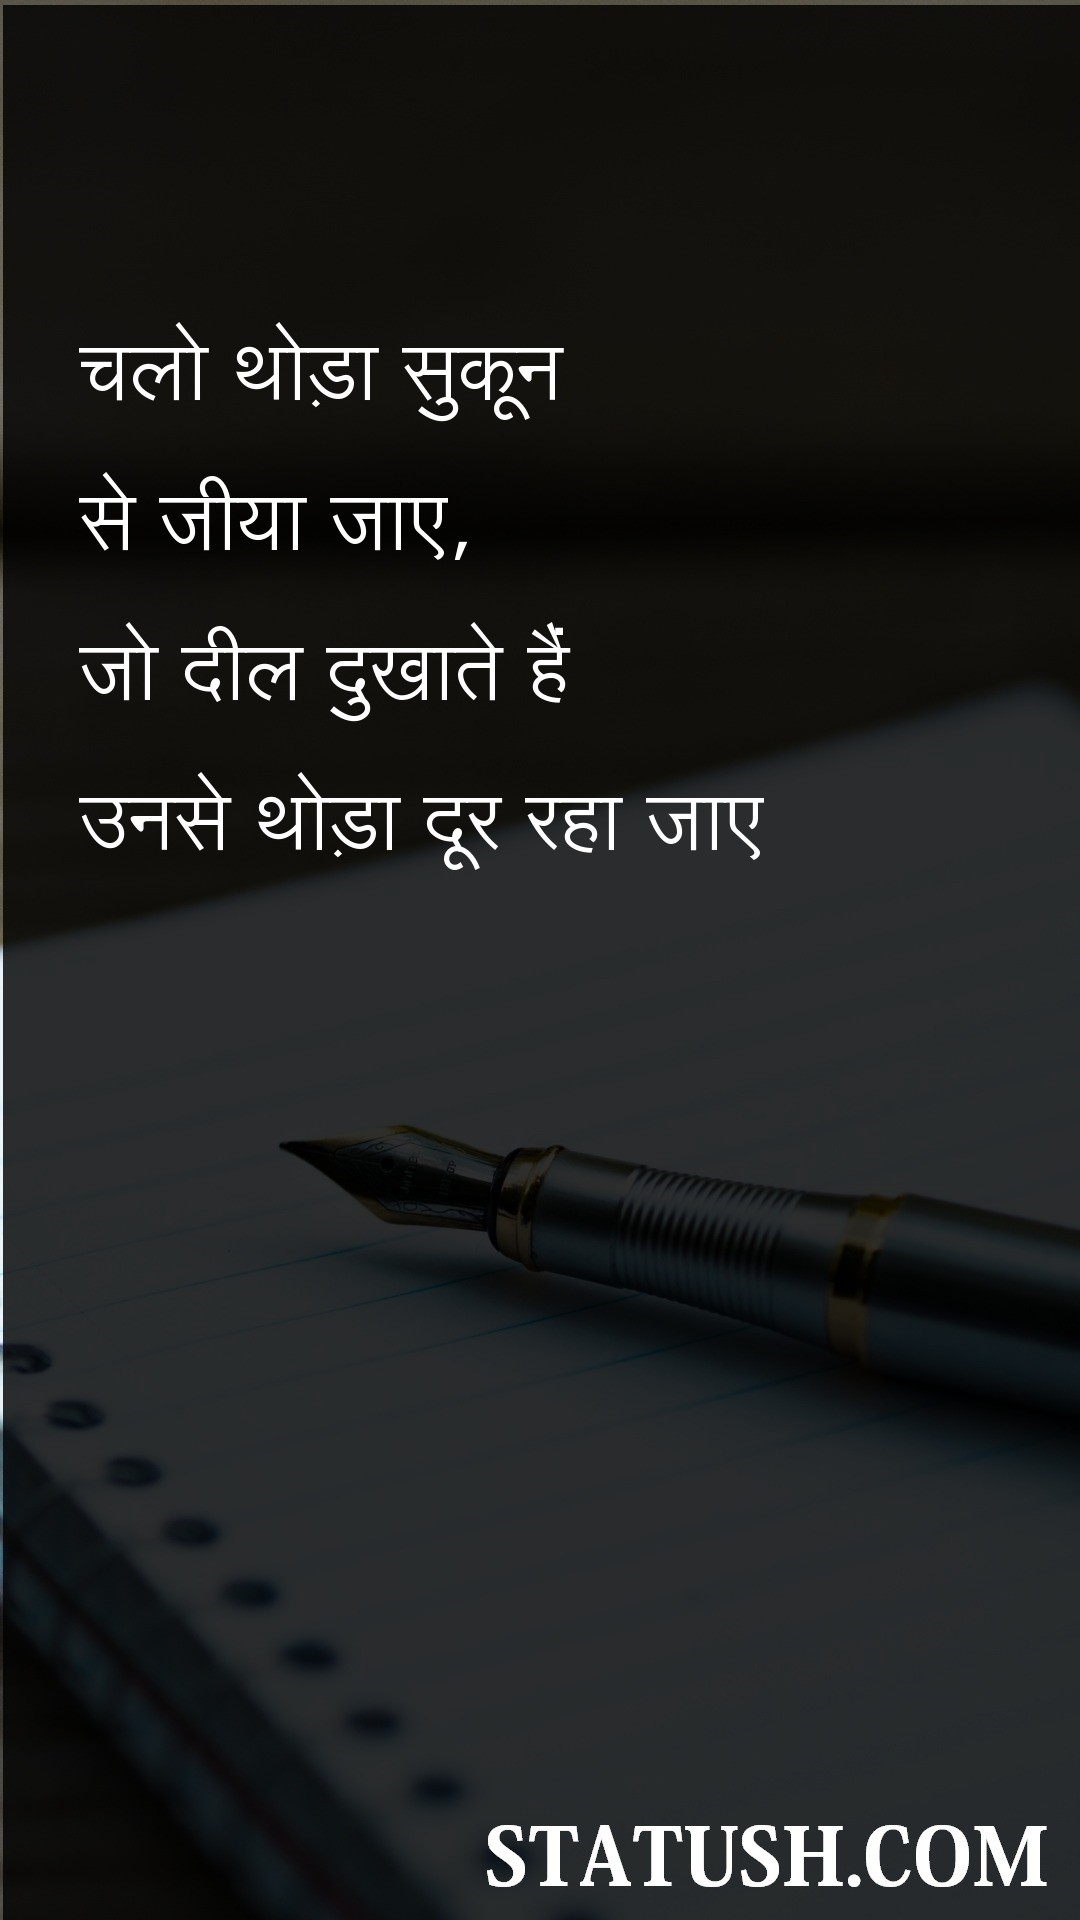 Lets live a little relaxed - Hindi Quotes at statush.com